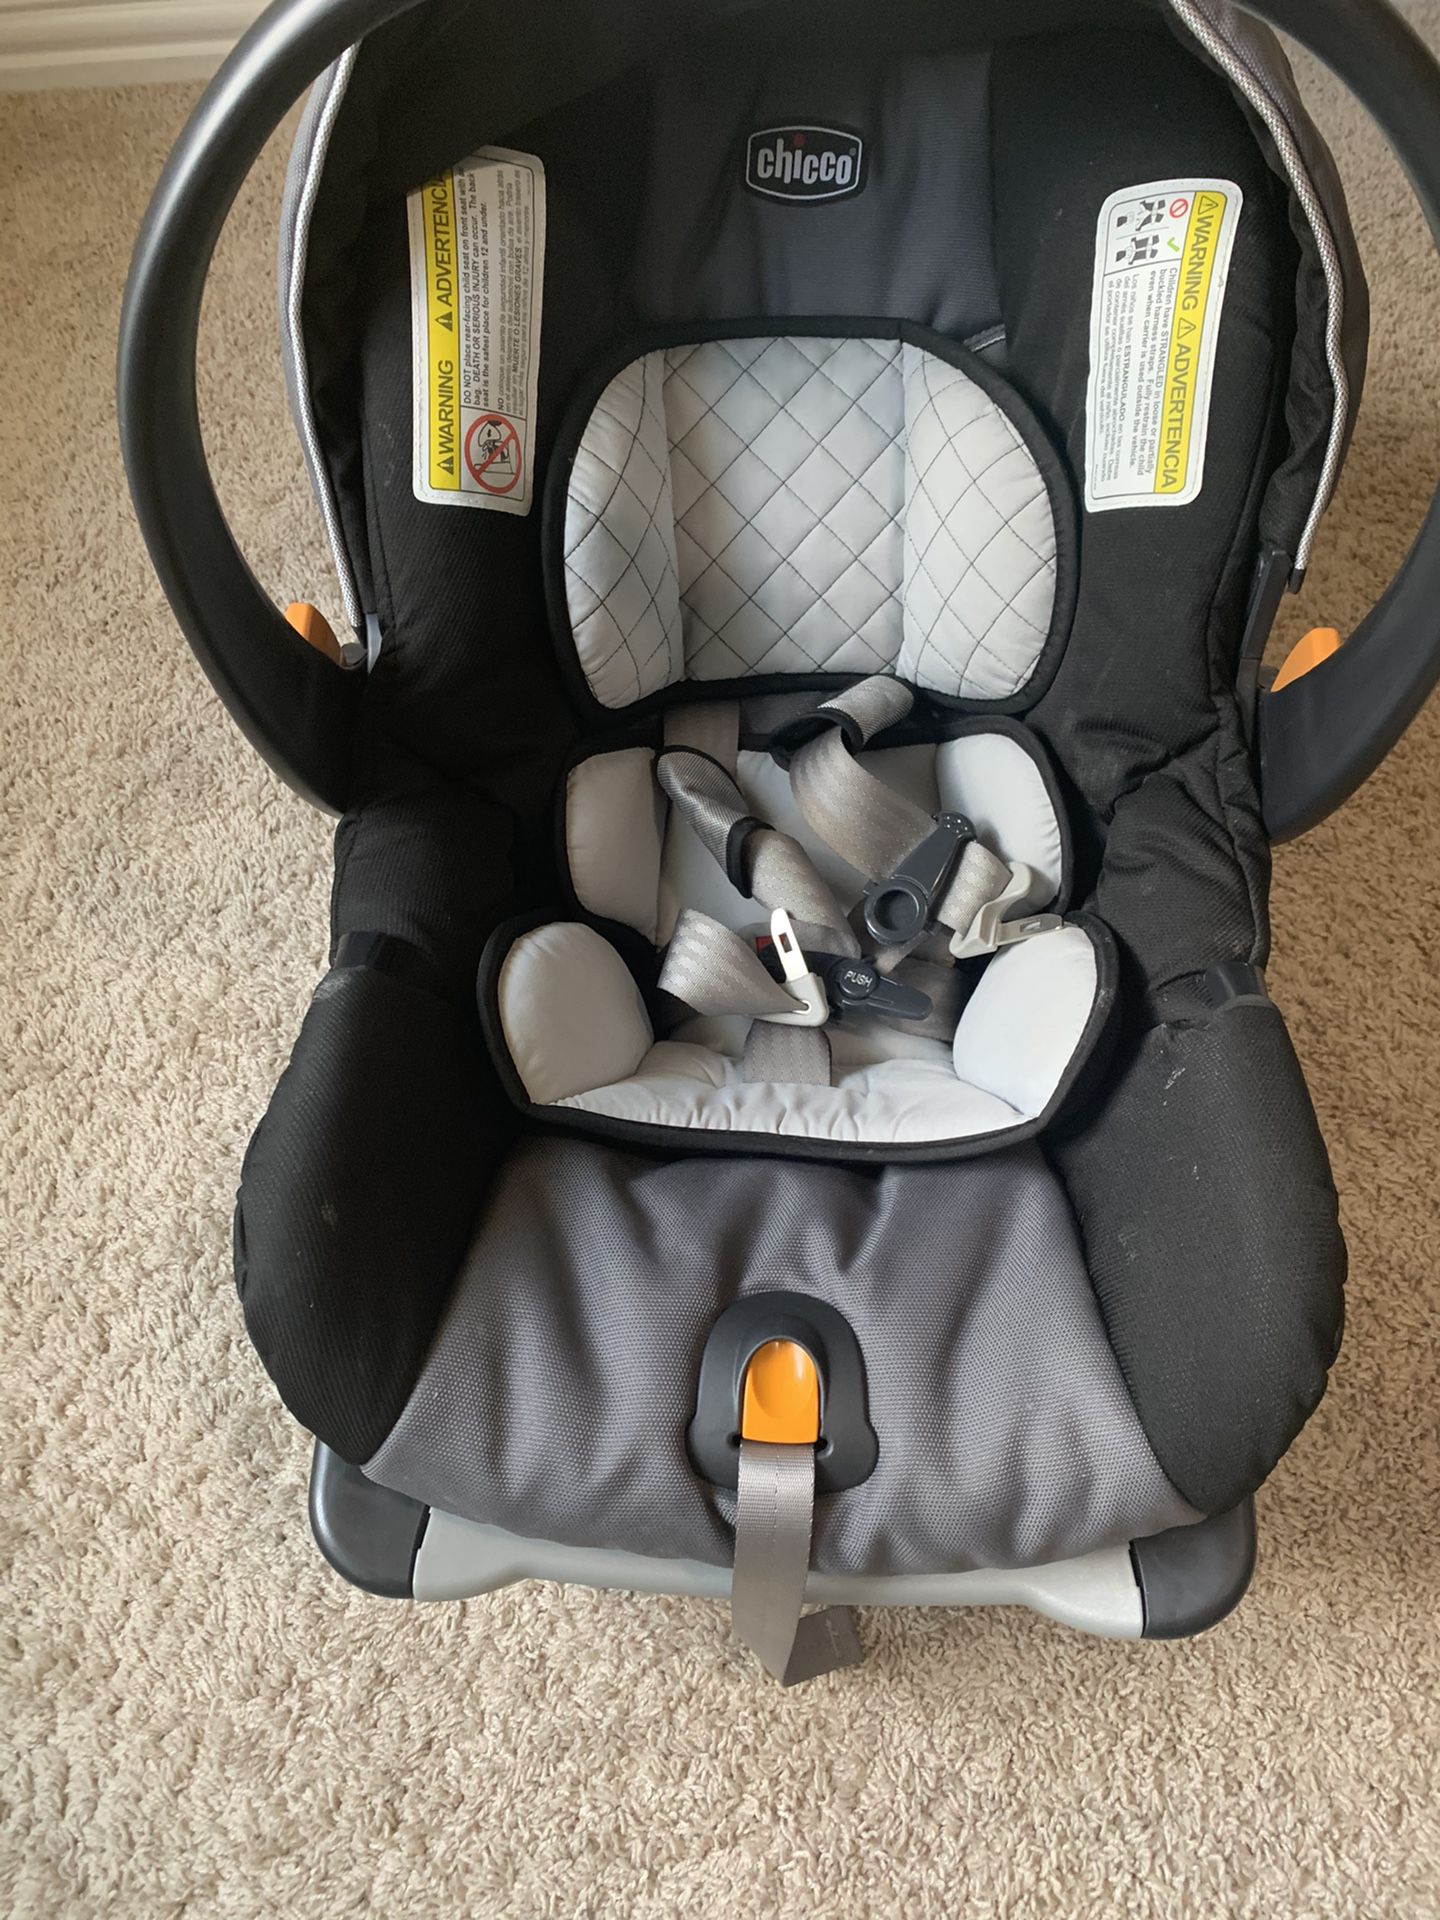 Chiccos Key fit 30 Car Seat With Base